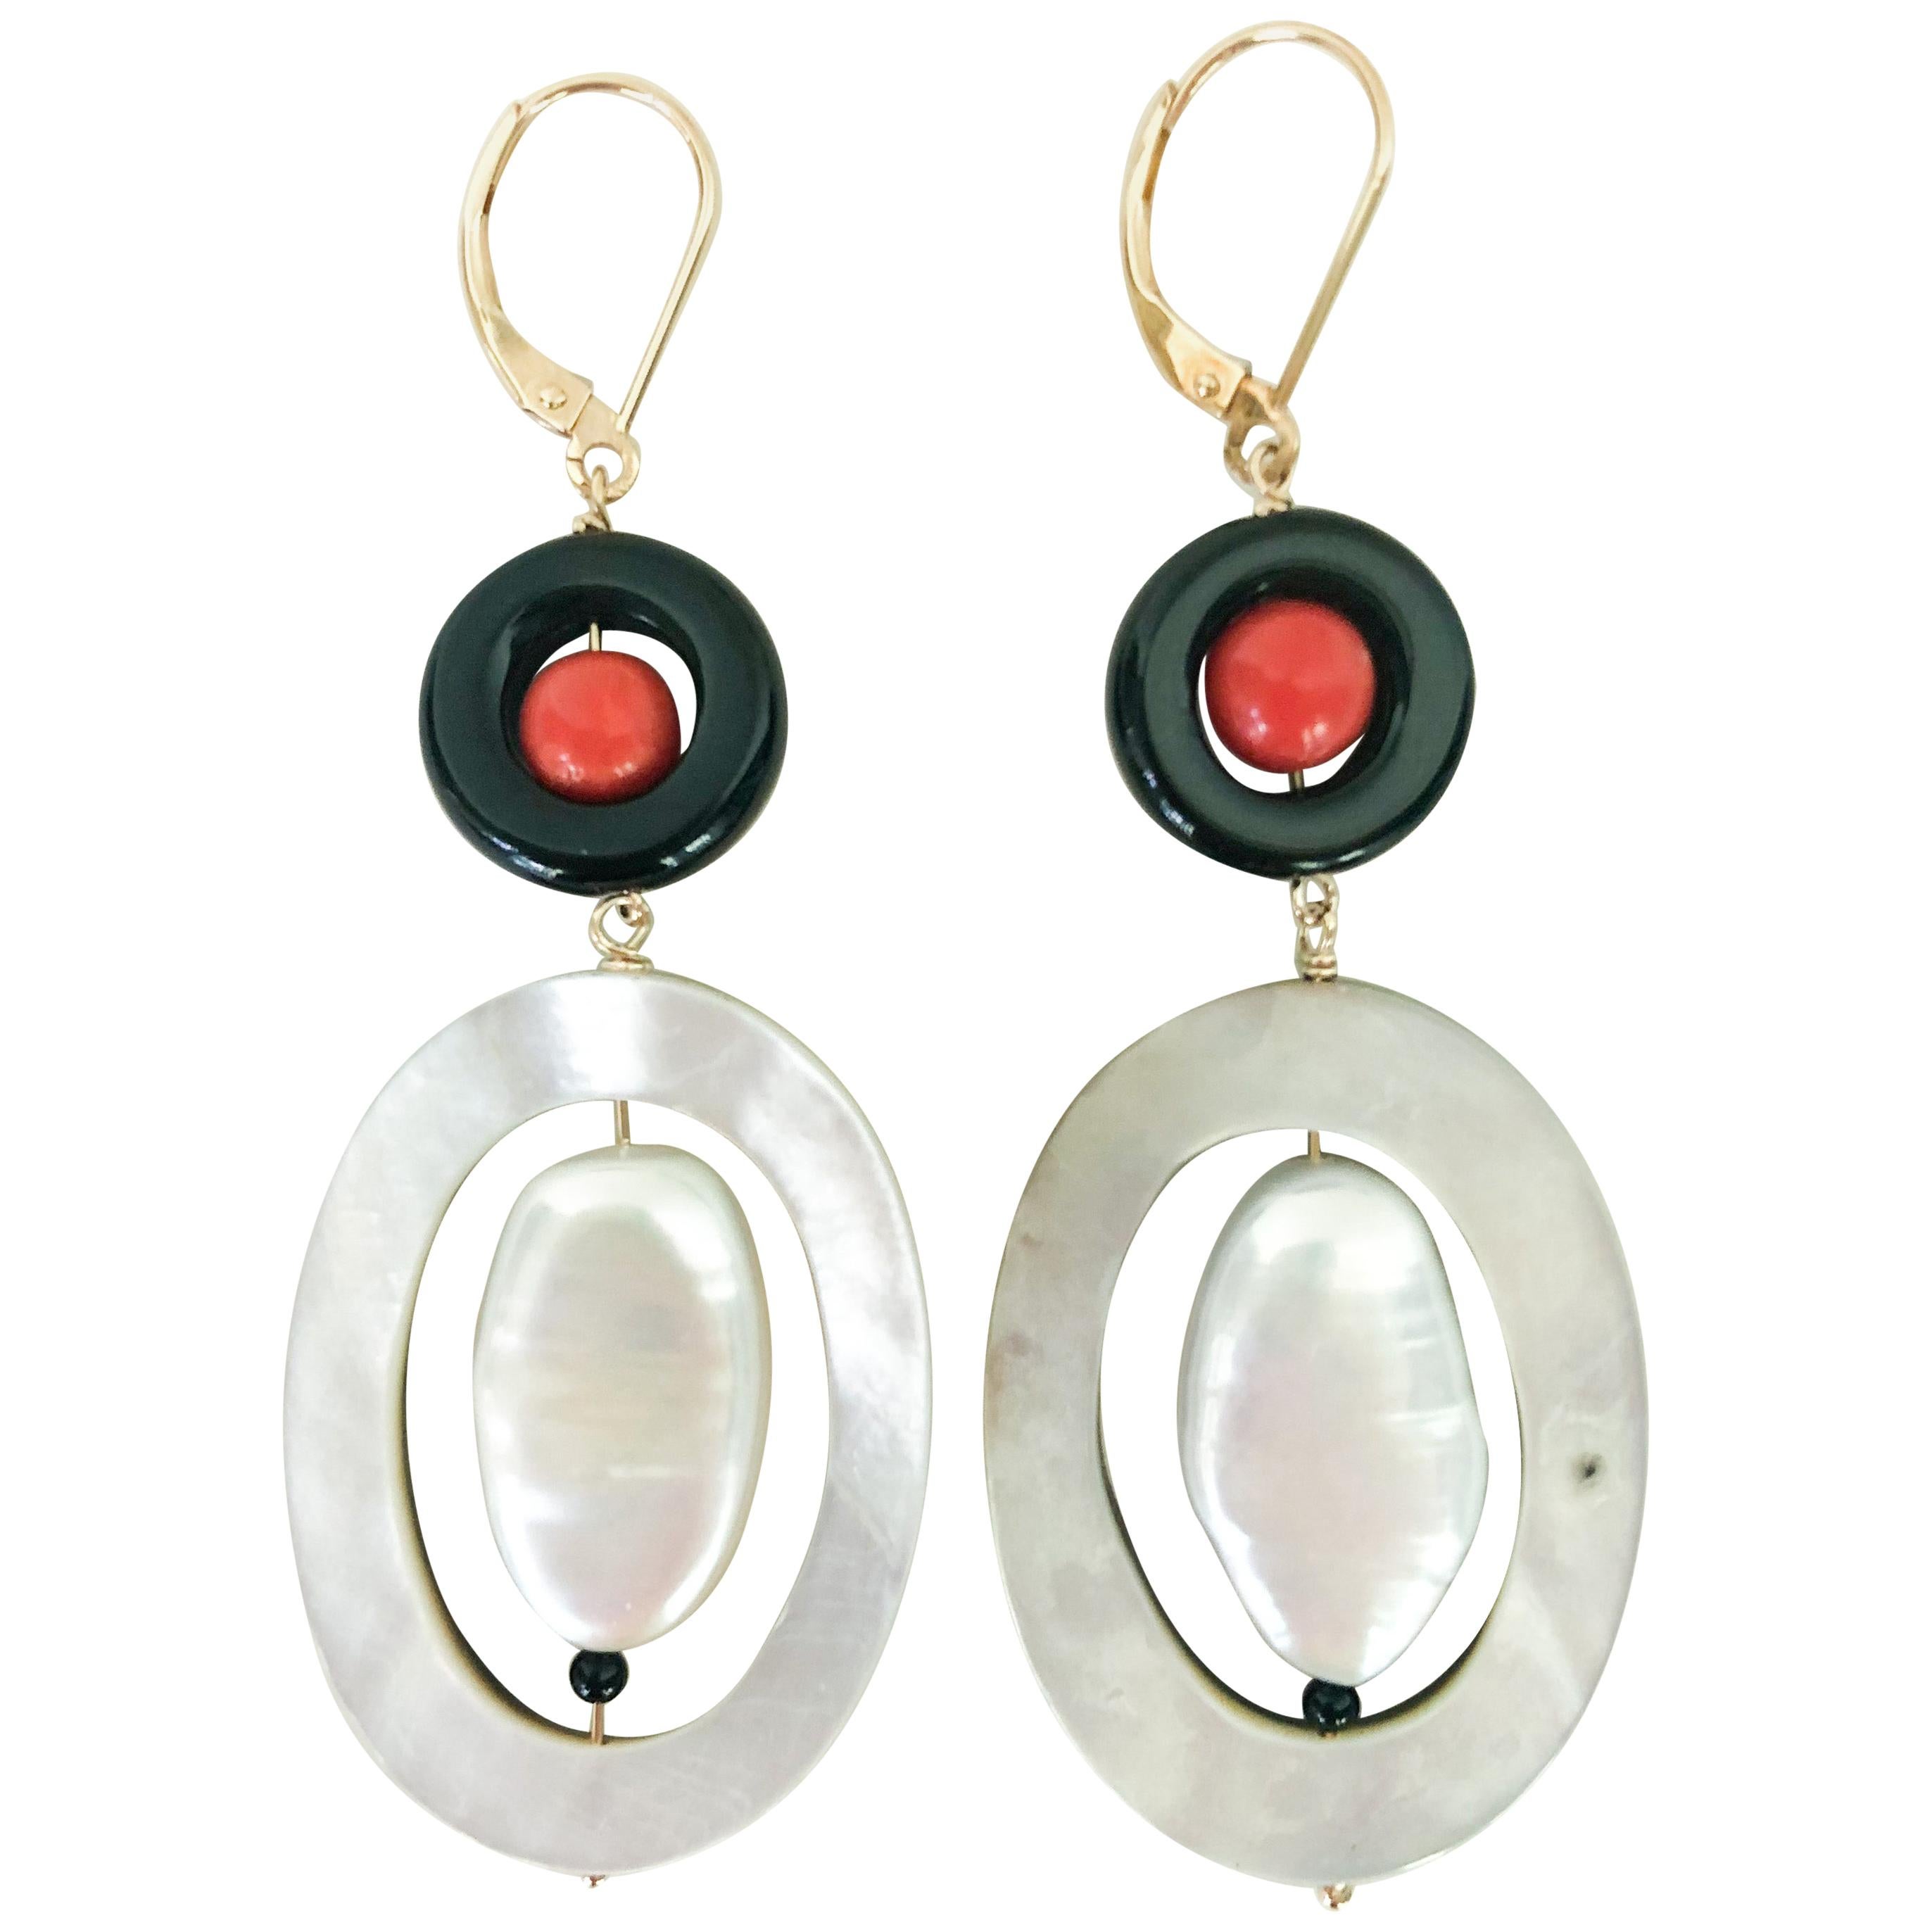 These unique art deco style earrings are made with a coral bead enclosed in an onyx ring, and a flat oval pearl enclosed in a mother of pearl oval ring. The wiring is made of 14k yellow gold and 14k yellow gold lever backs. The earrings are about